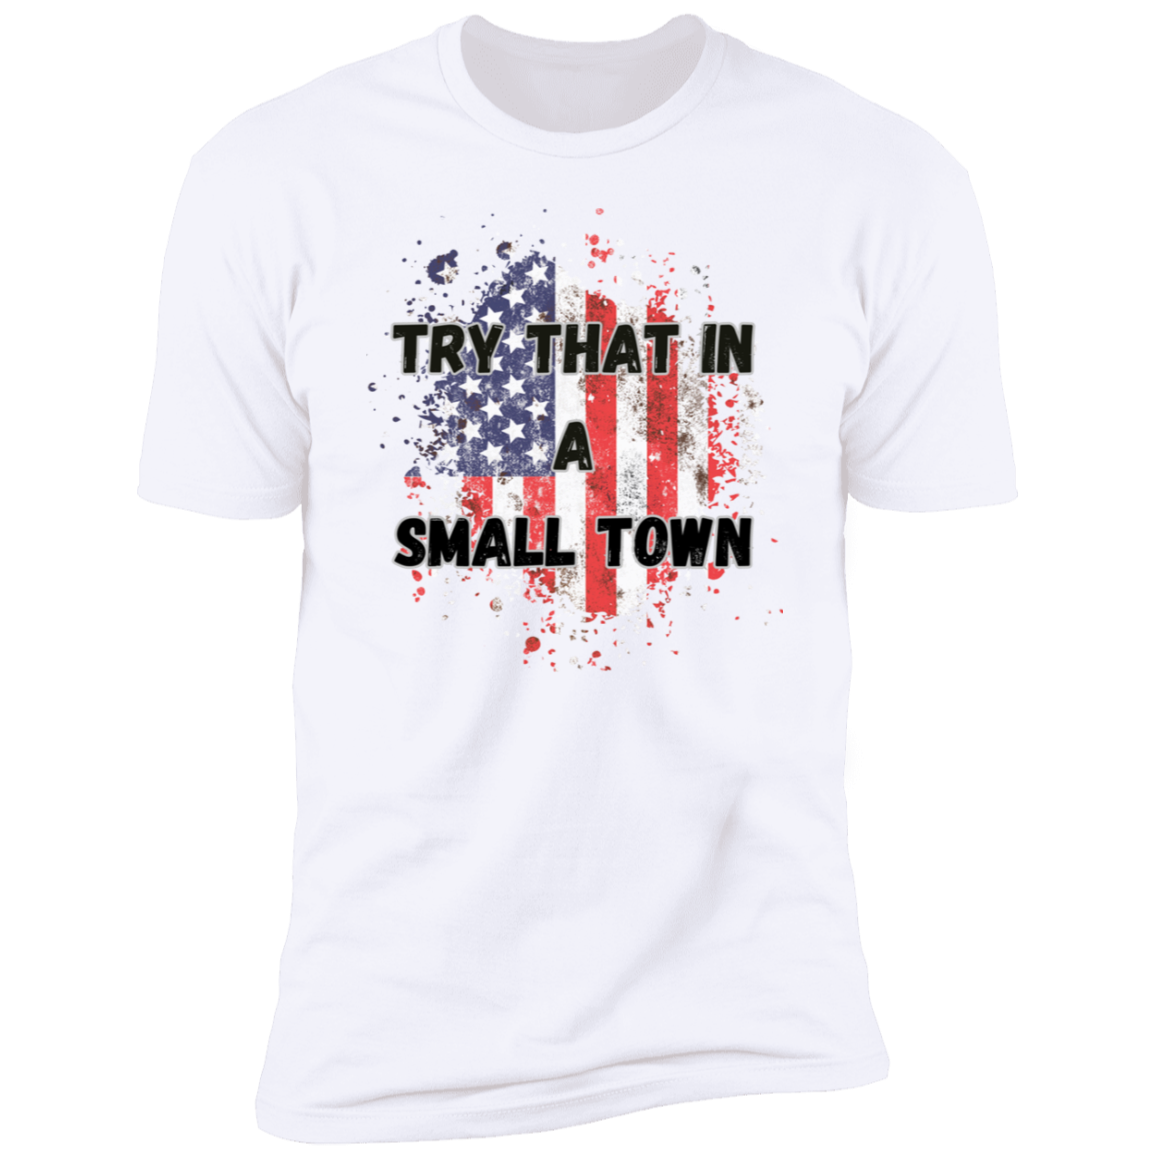 Try That in a Small Town Premium Short Sleeve T-Shirt